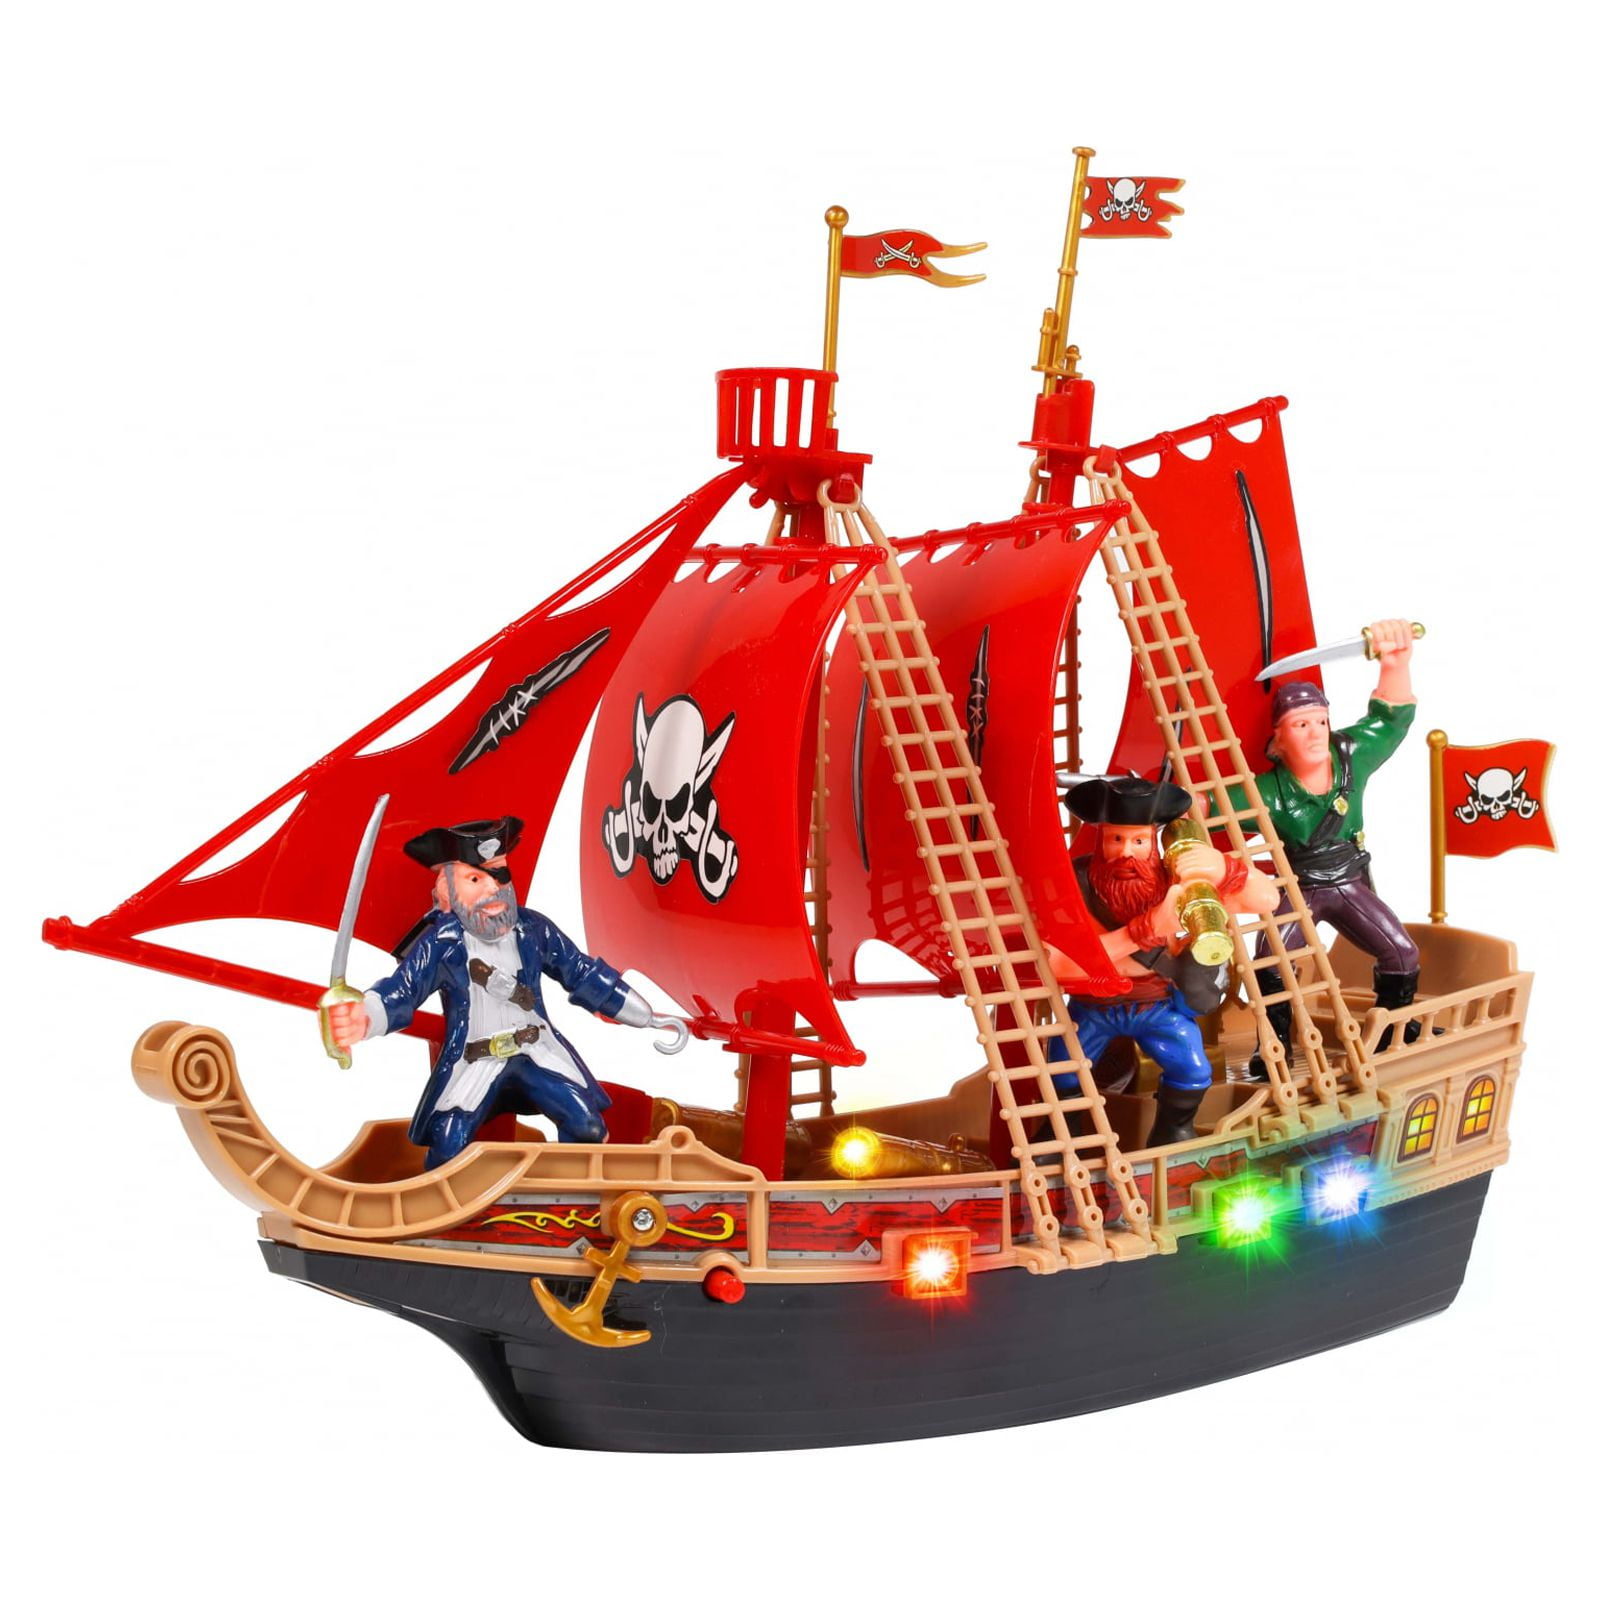 KidPlay Light up Pirate Ship Imagination Adventure Boys Boat Toy Real  Sounds, Ages 3+